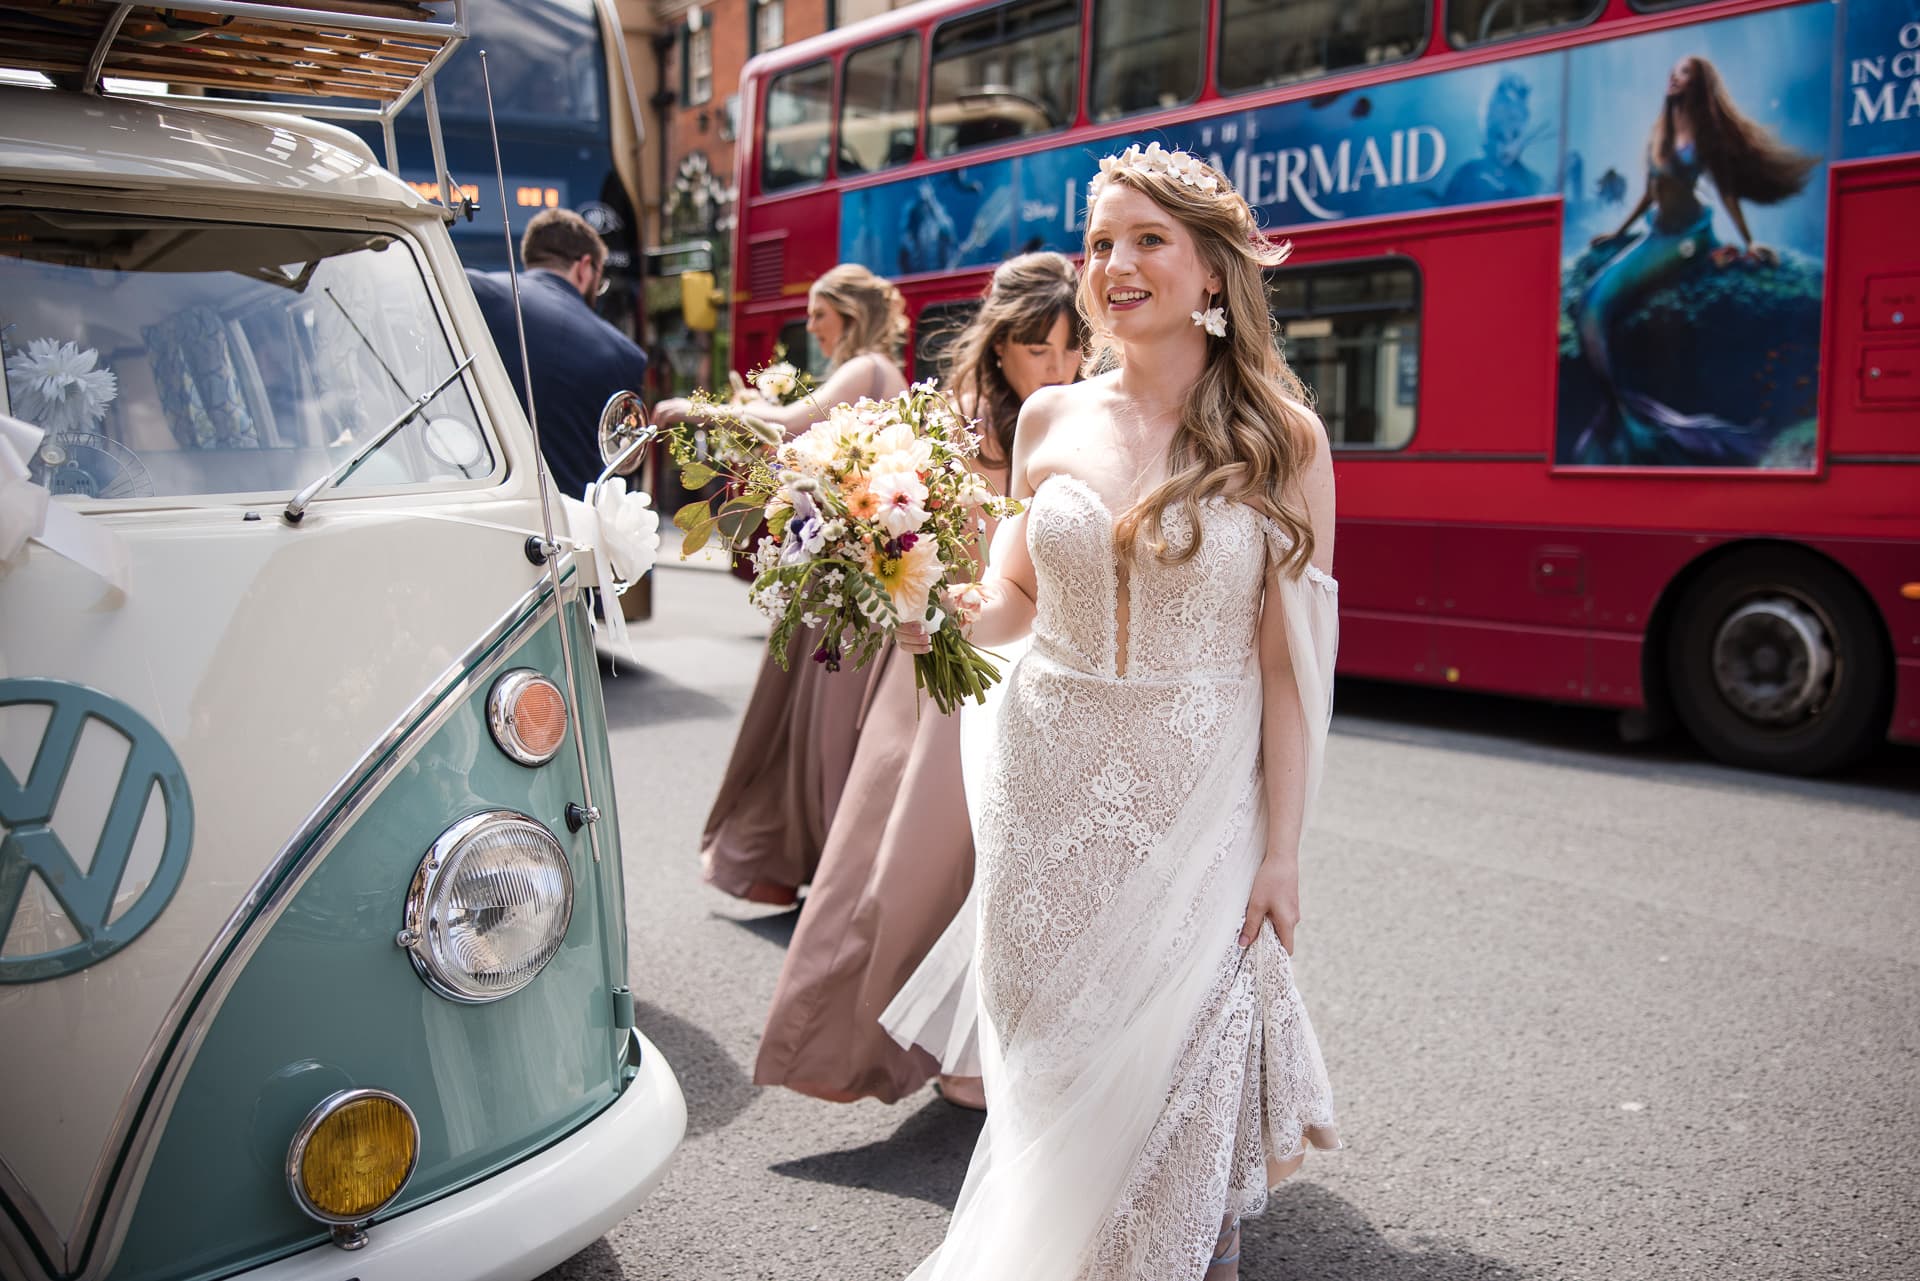 Bride walking next to the Campervan with a Double Decker in the background